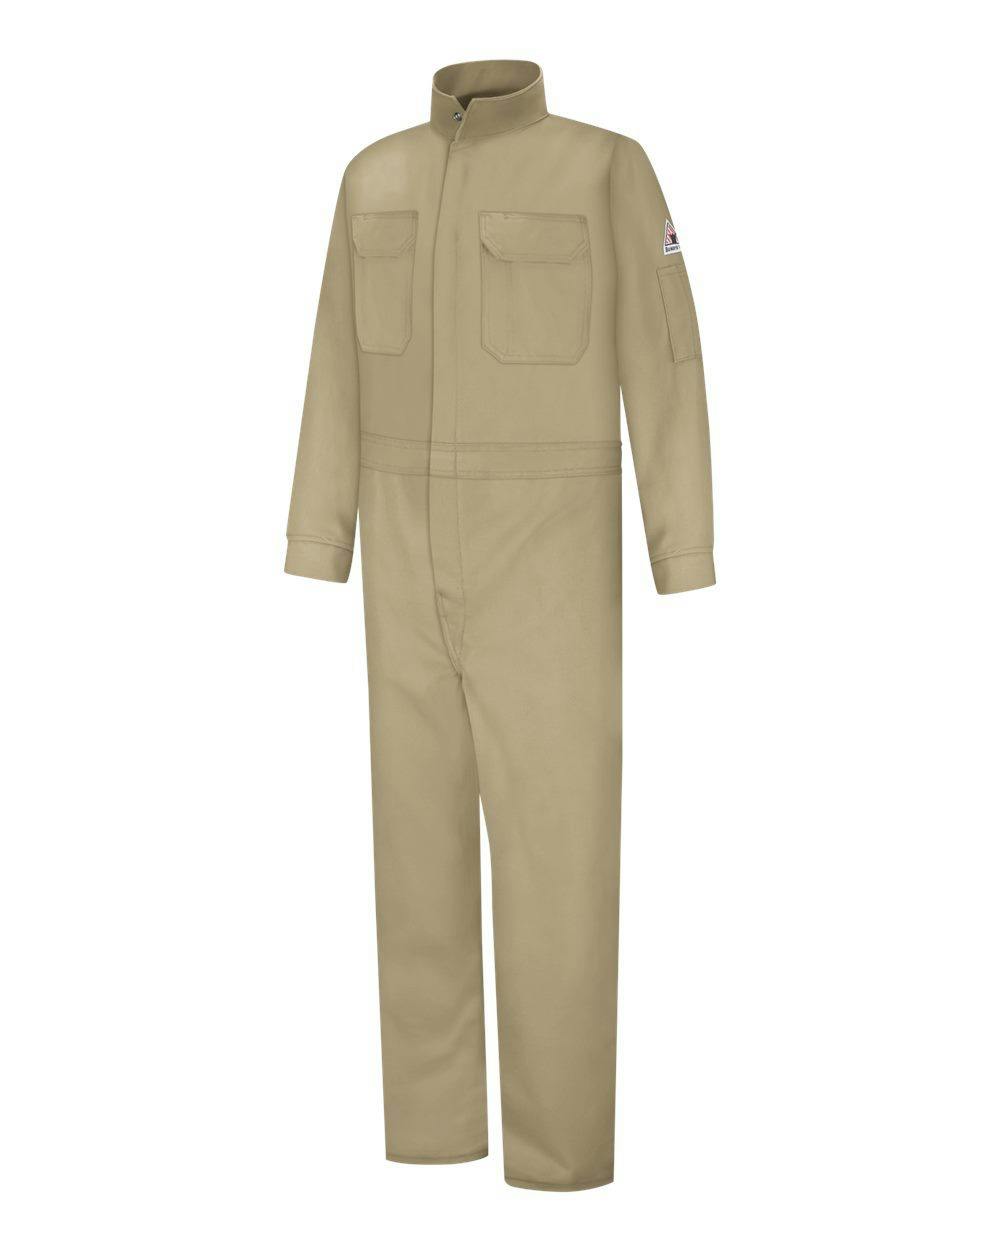 Image for Women's Premium Coverall with CSA Compliant Reflective Trim - CLB3